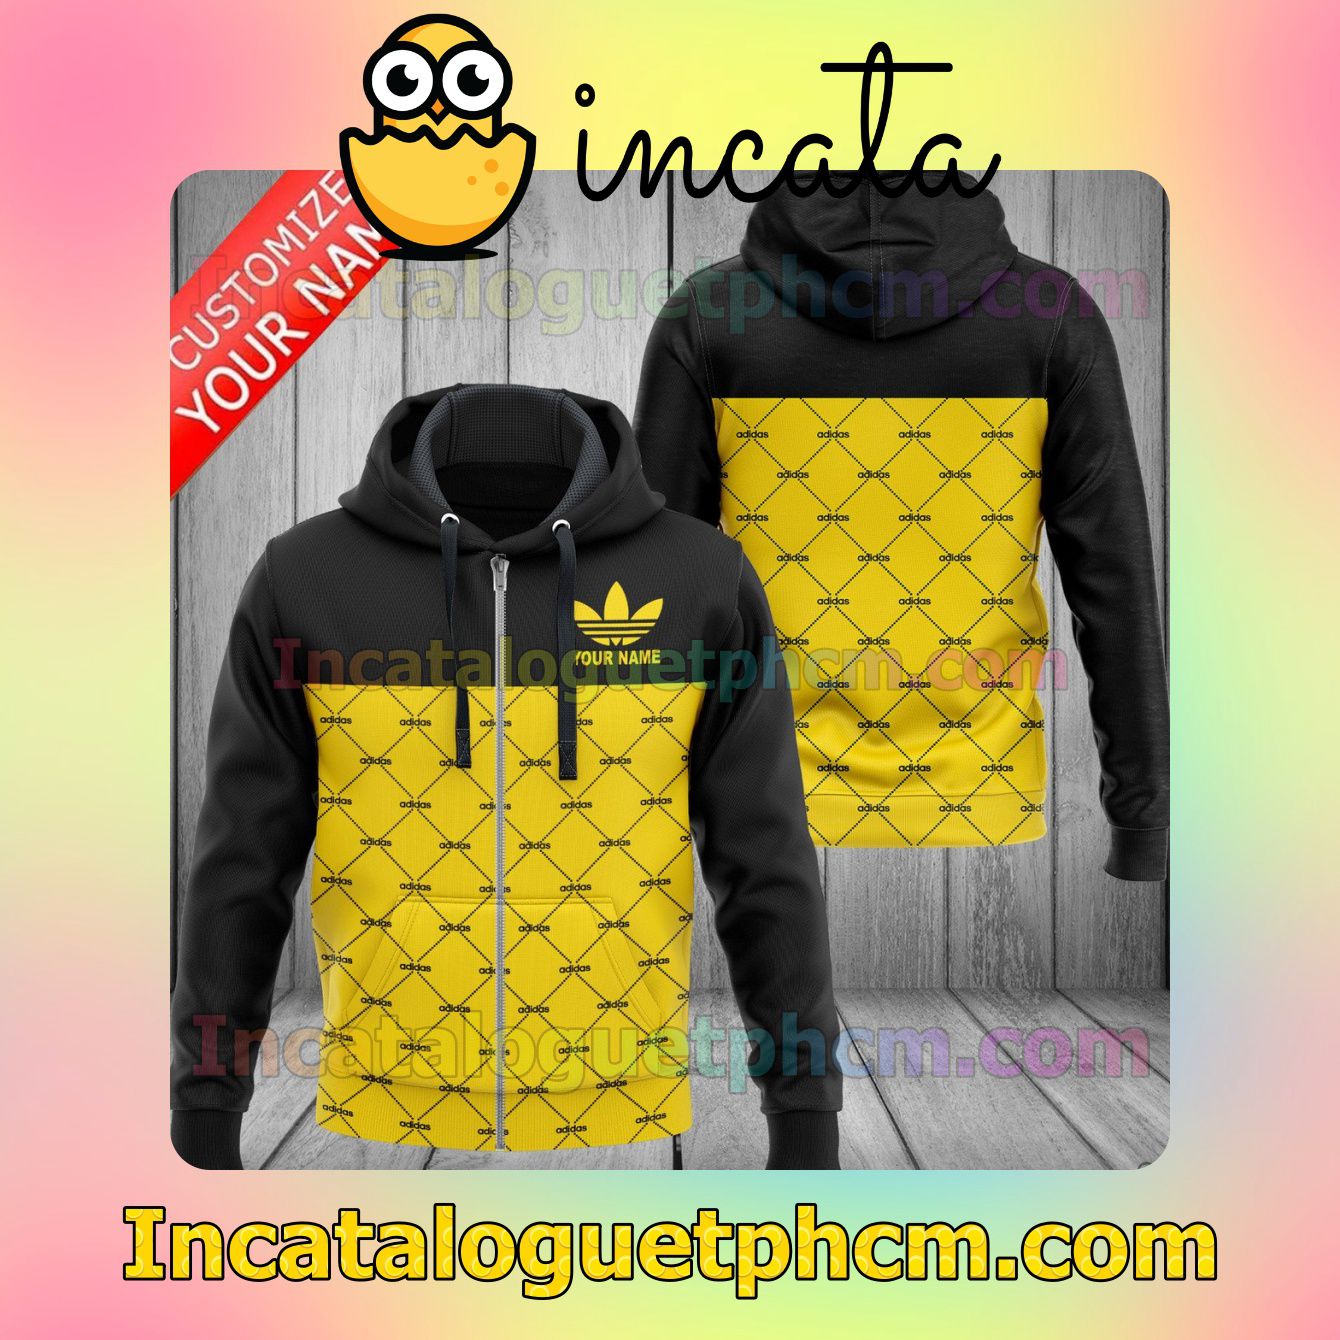 Adidas Linear Graphic Black And Yellow Long Sleeve Jacket Mens Hoodie